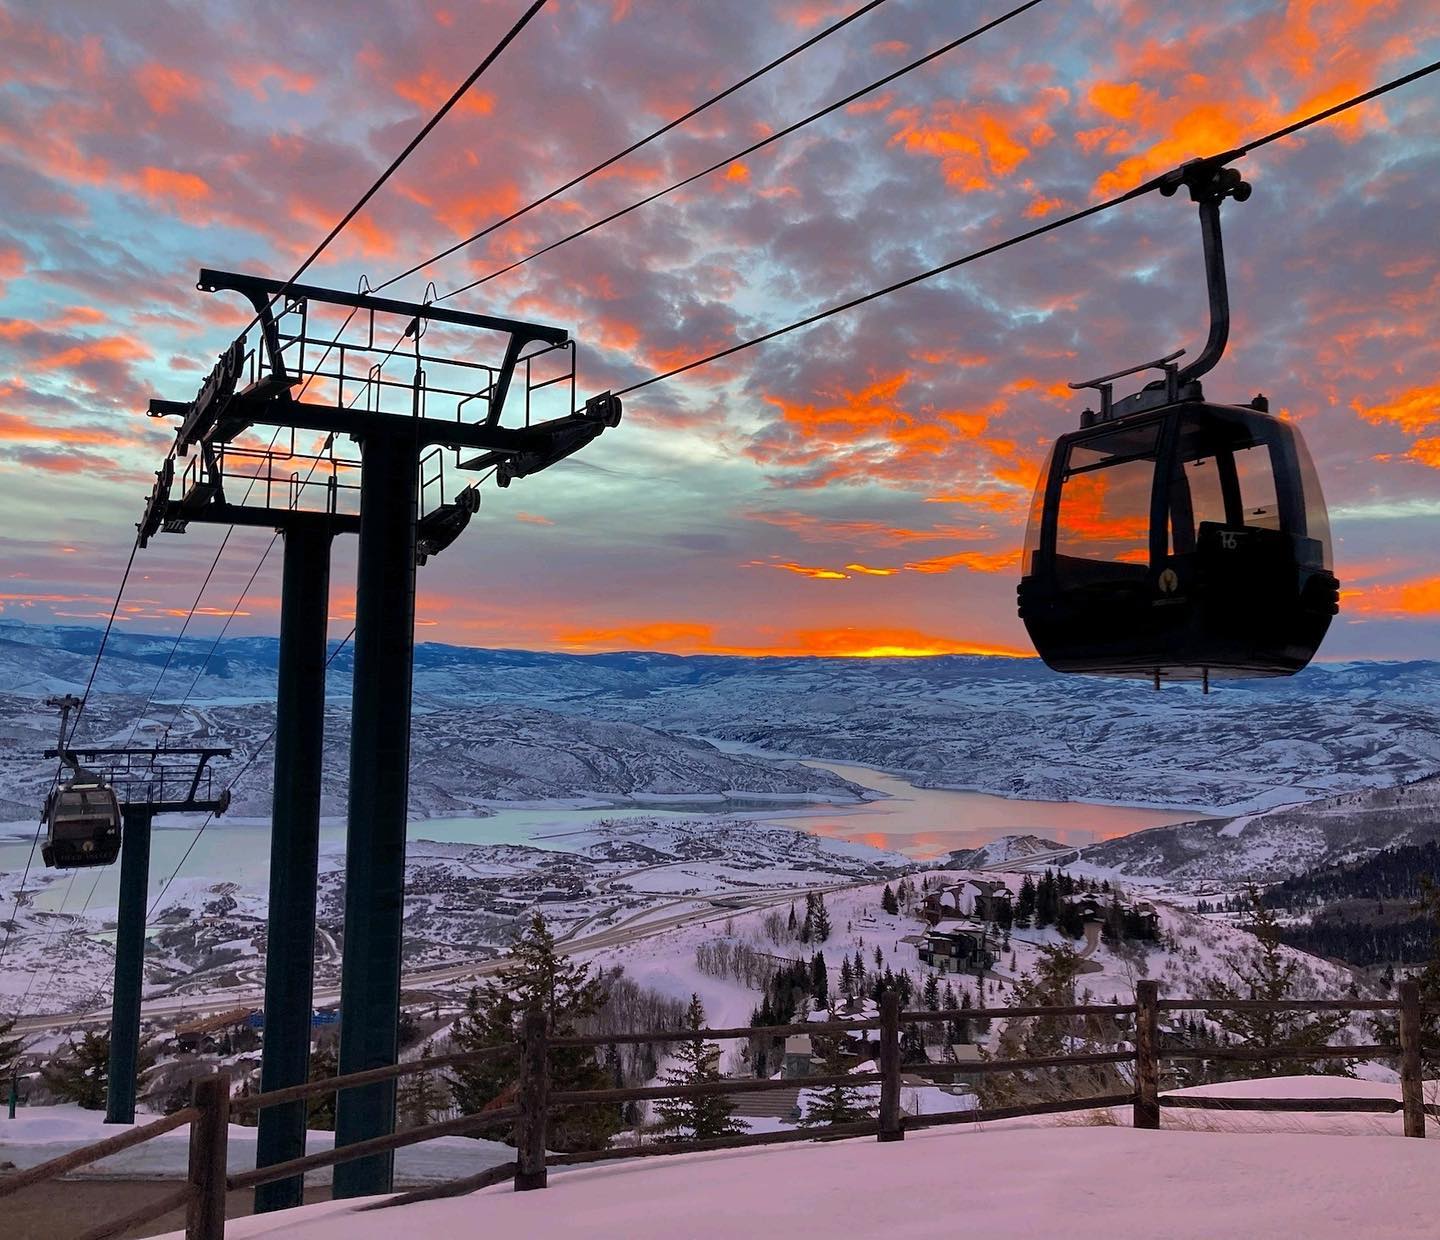 Sunset at Deer Valley